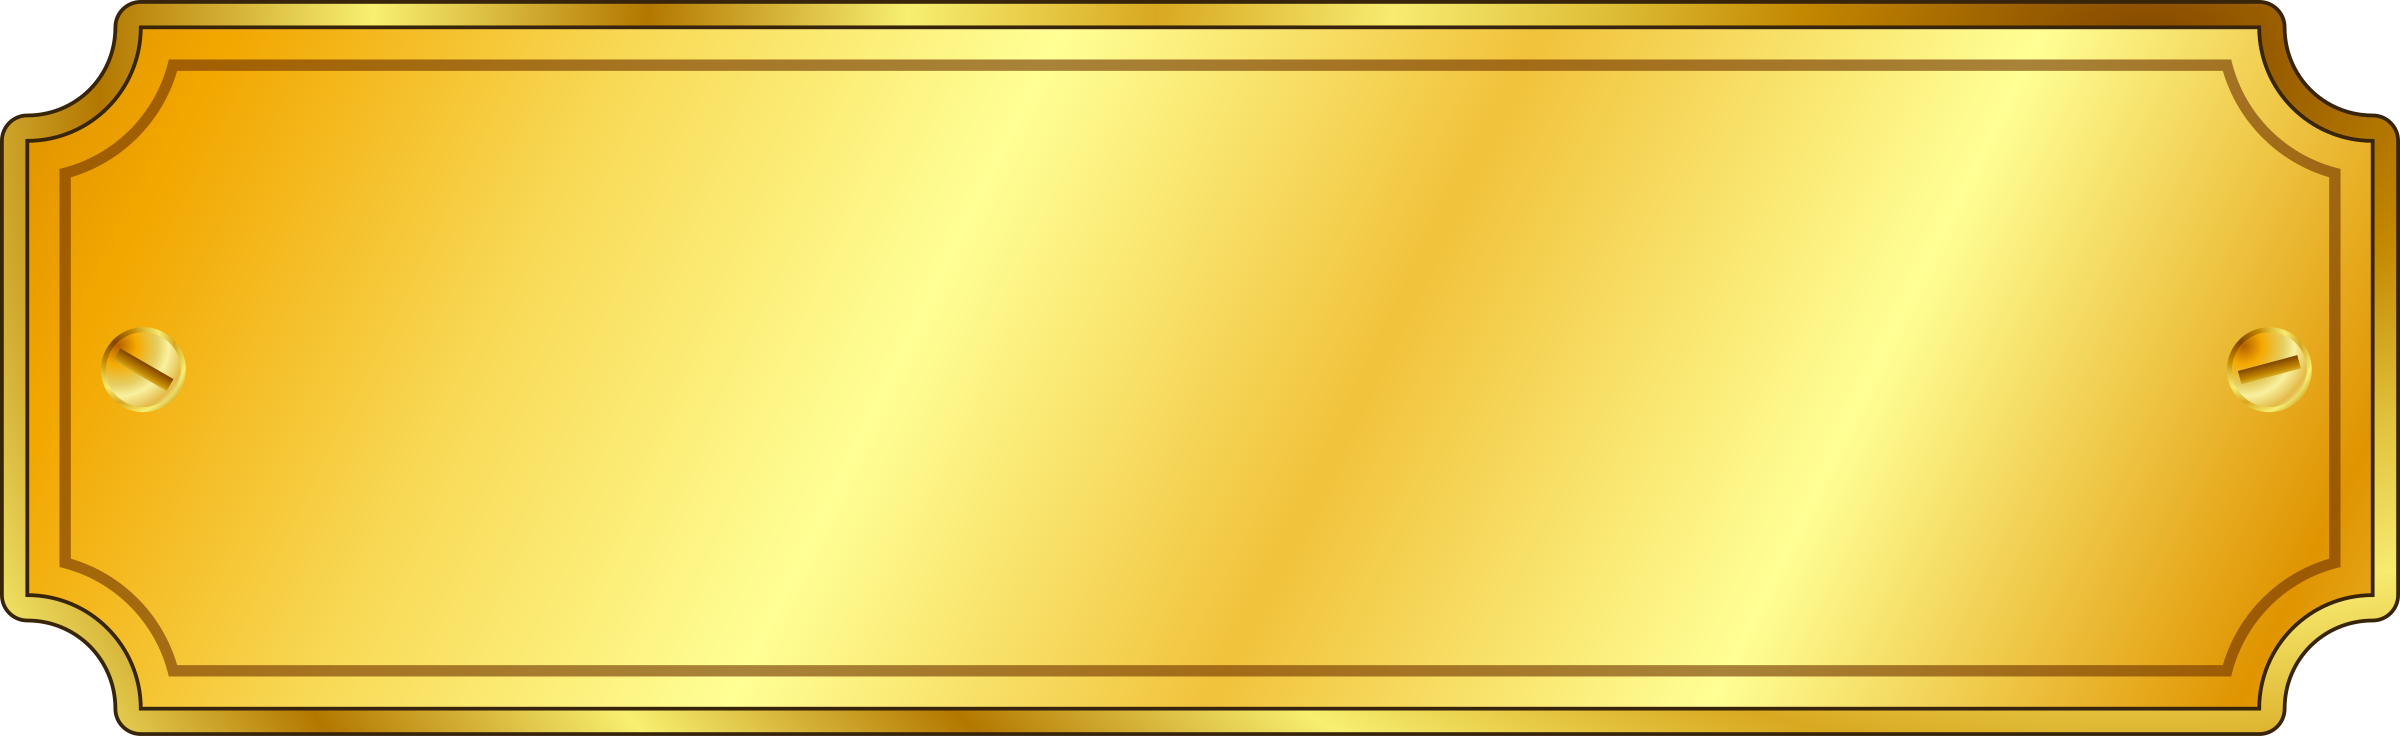 PNG File Name: Gold PlusPng.c